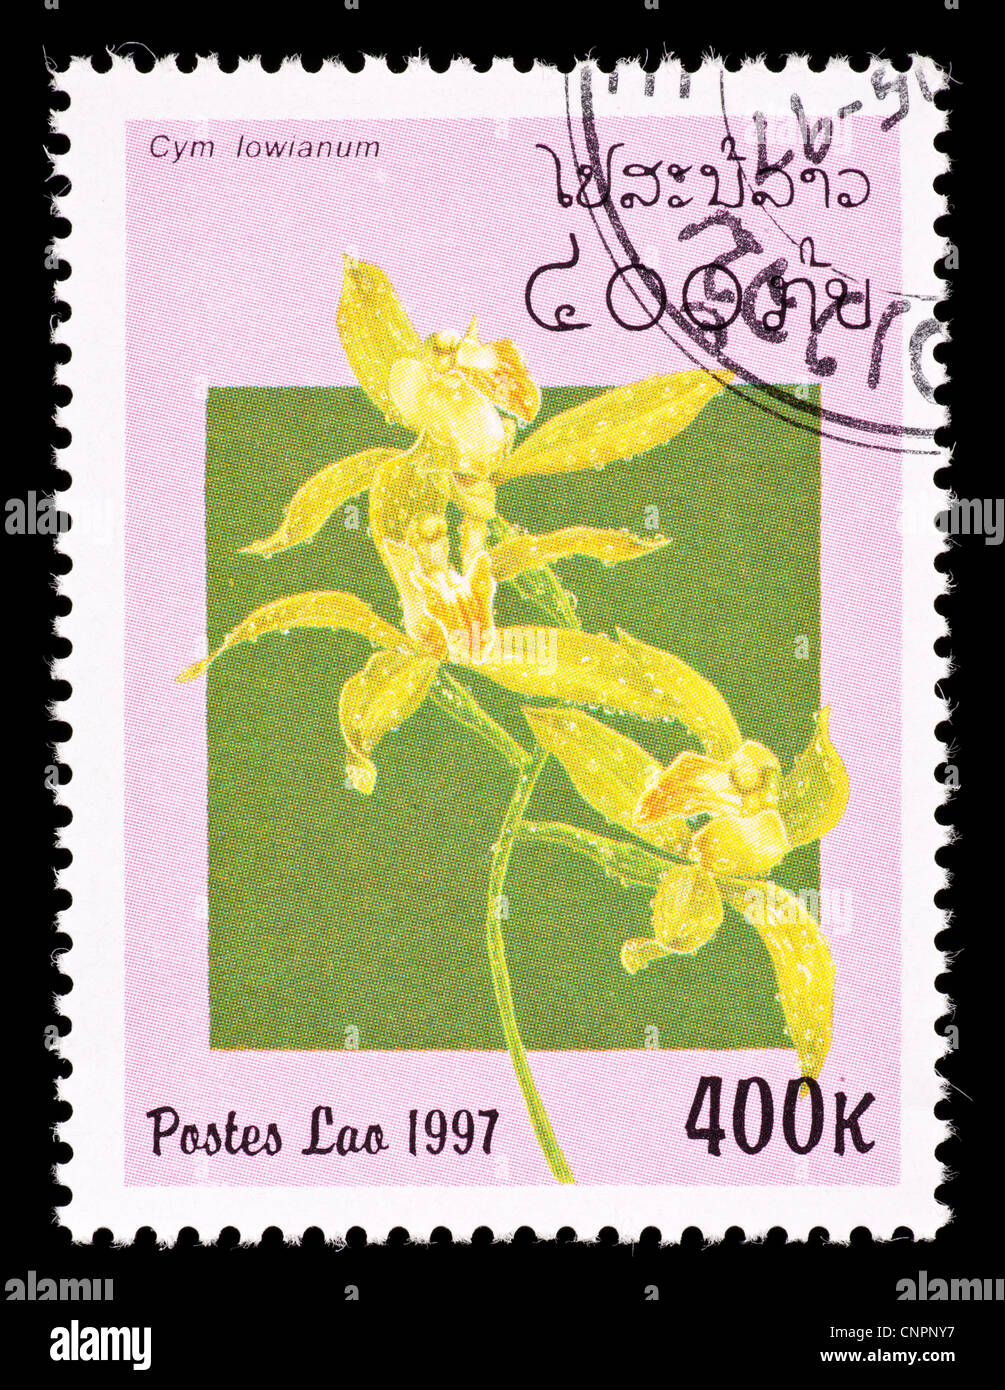 Postage stamp from Laos depicting an orchid (Cymbidium lowianum) Stock Photo